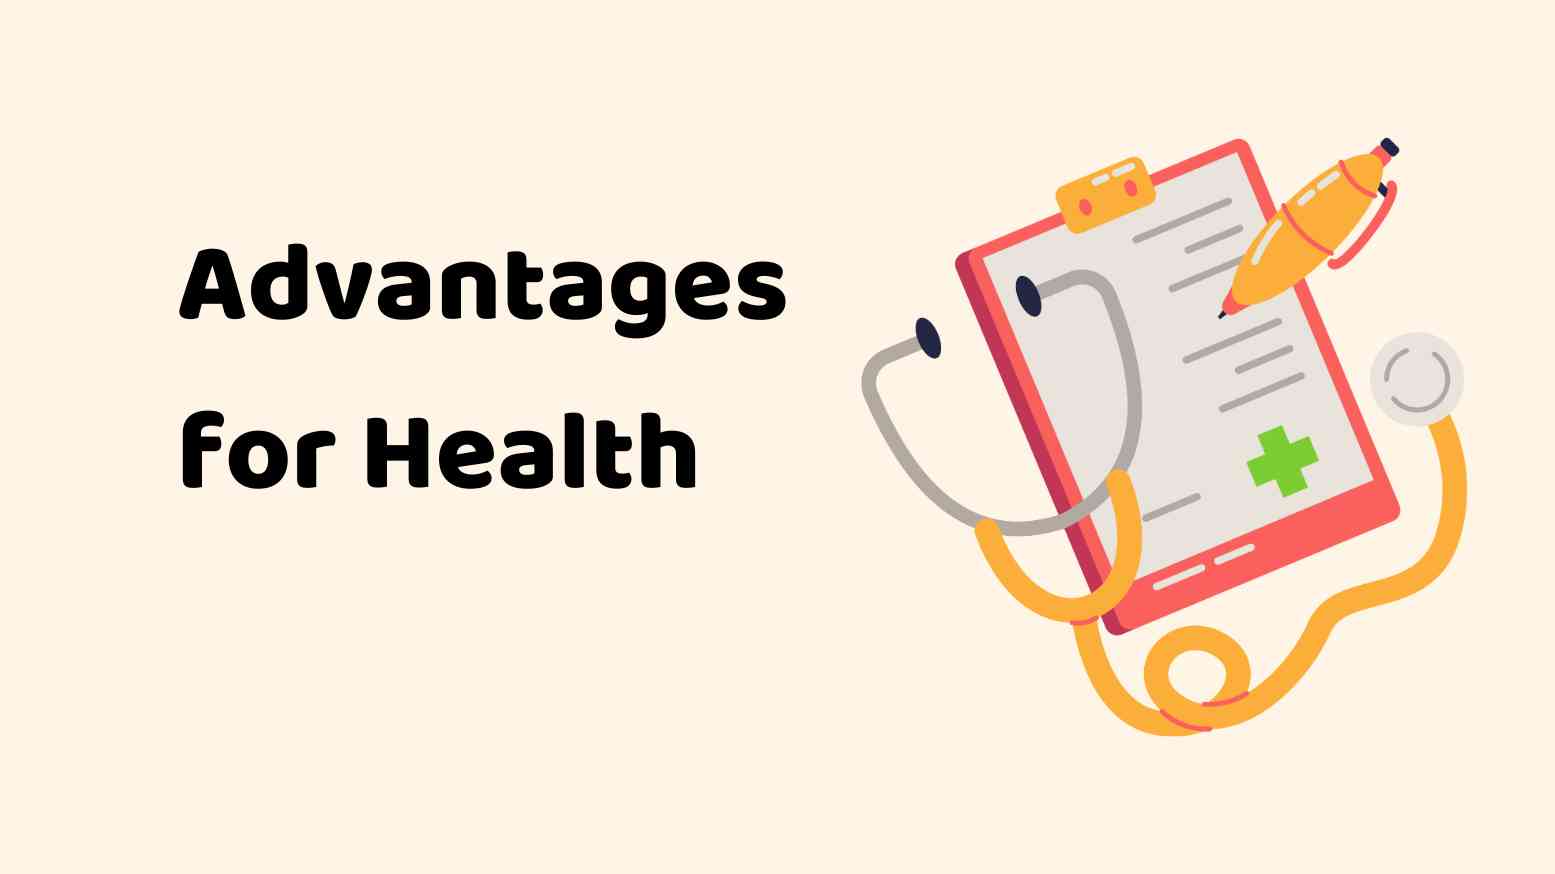 Advantages for Health